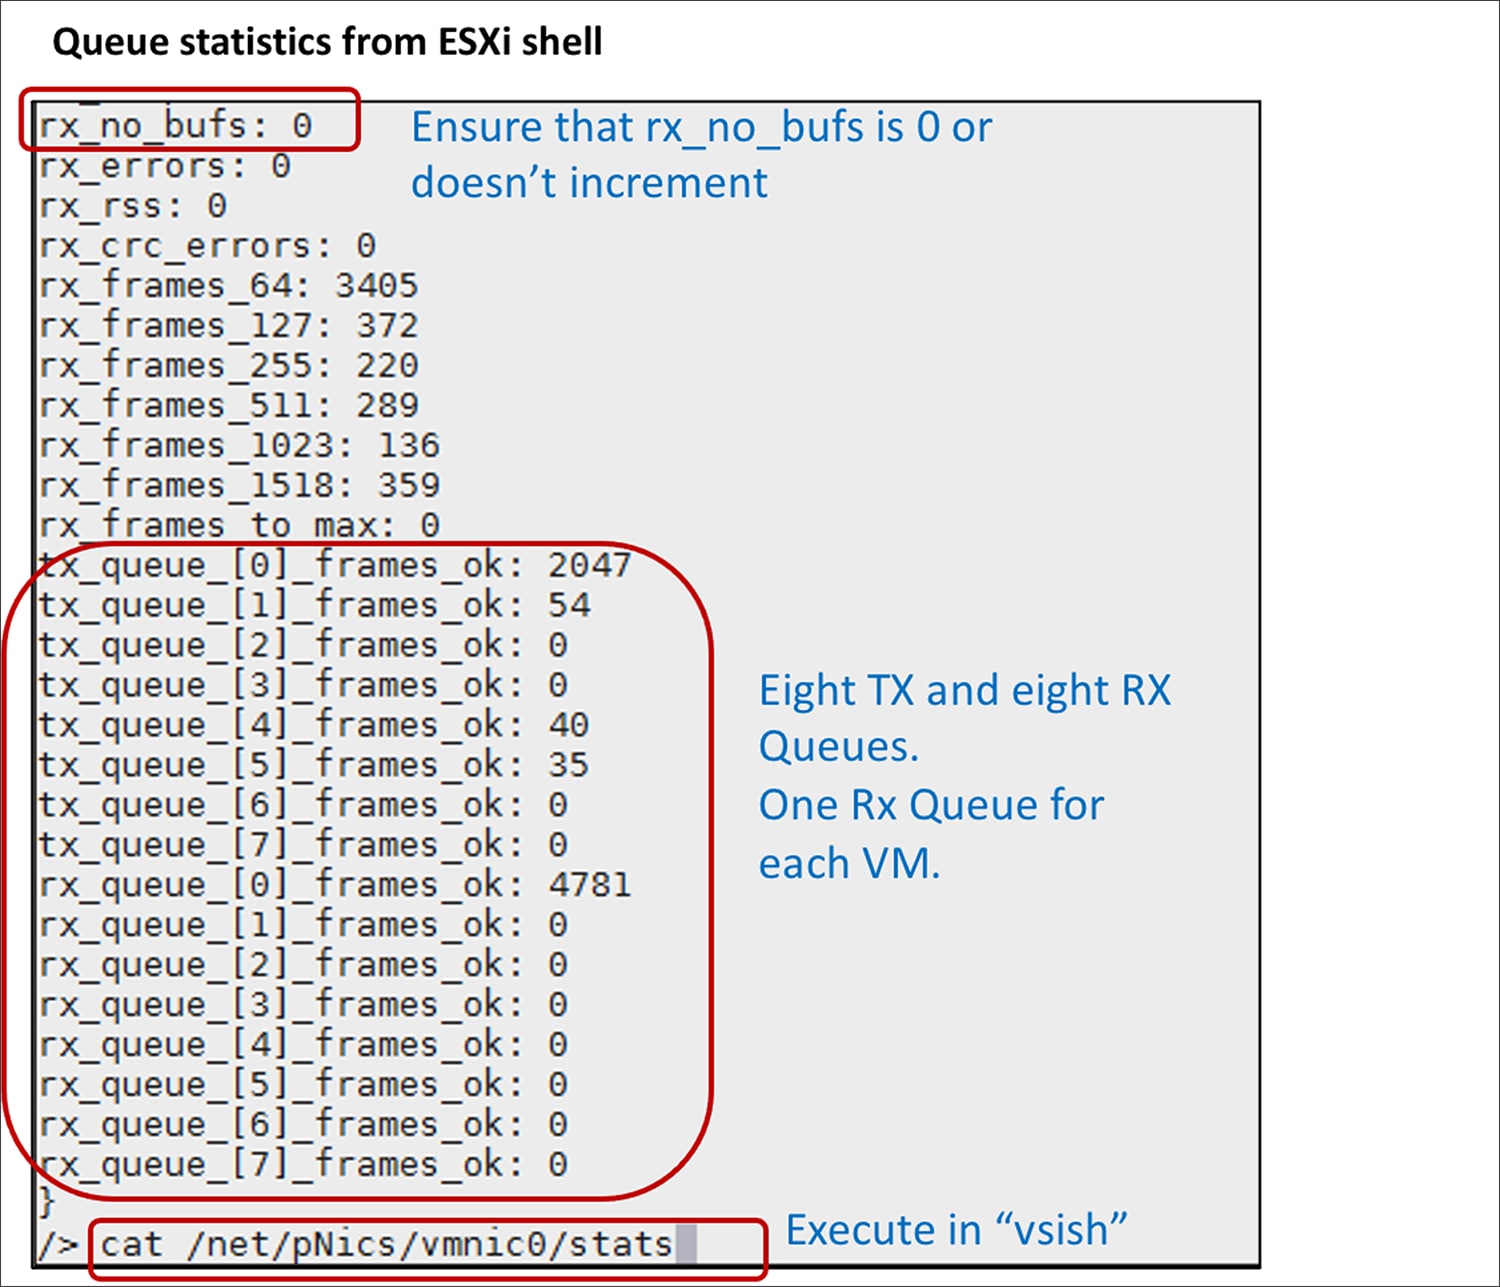 Queues allocated per vNIC on the ESXi host based on the VMQ configuration